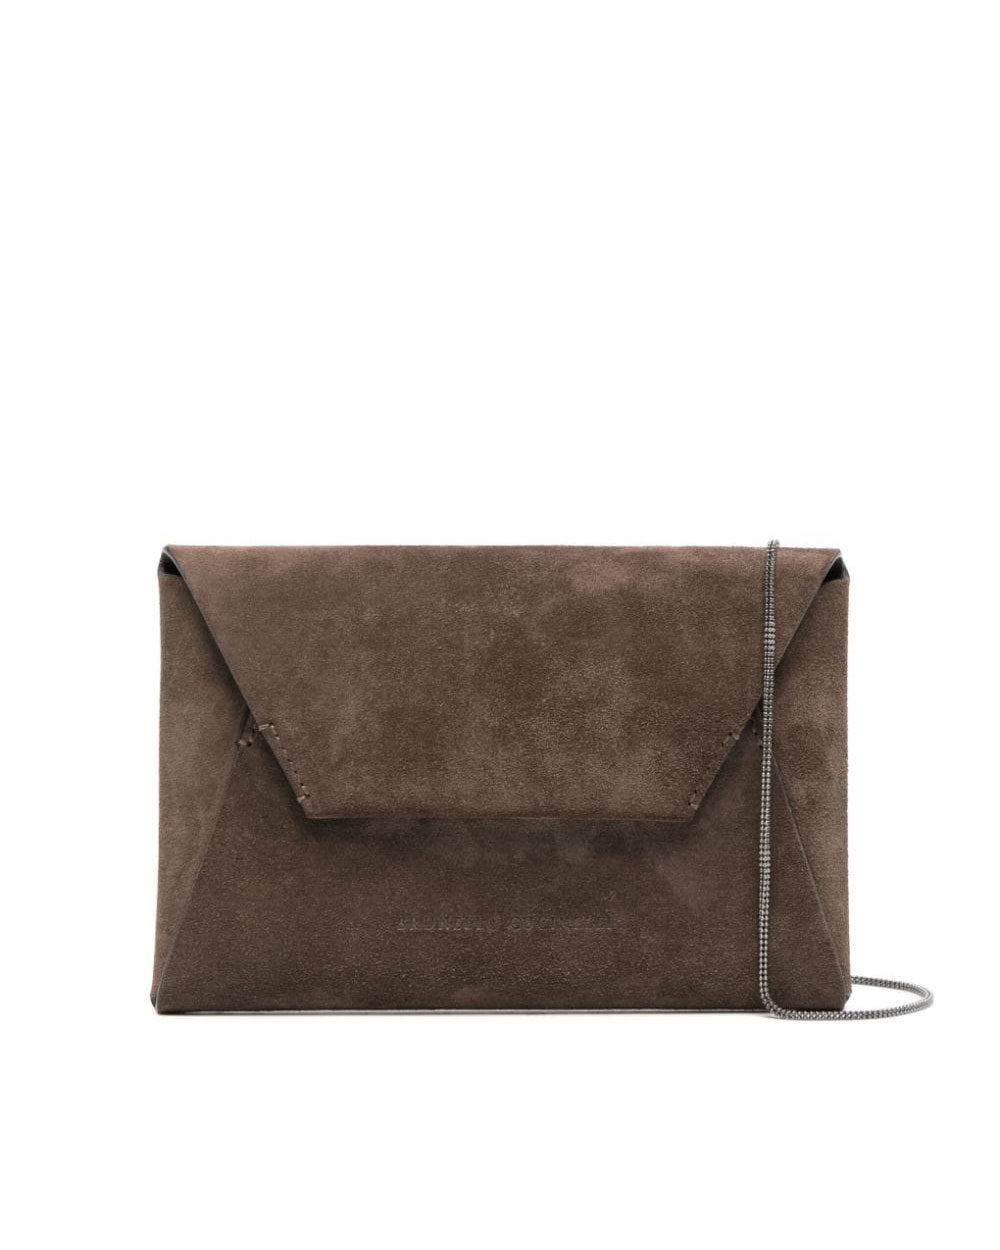 Suede Foldover Envelope Clutch with Shoulder Strap in Ossido